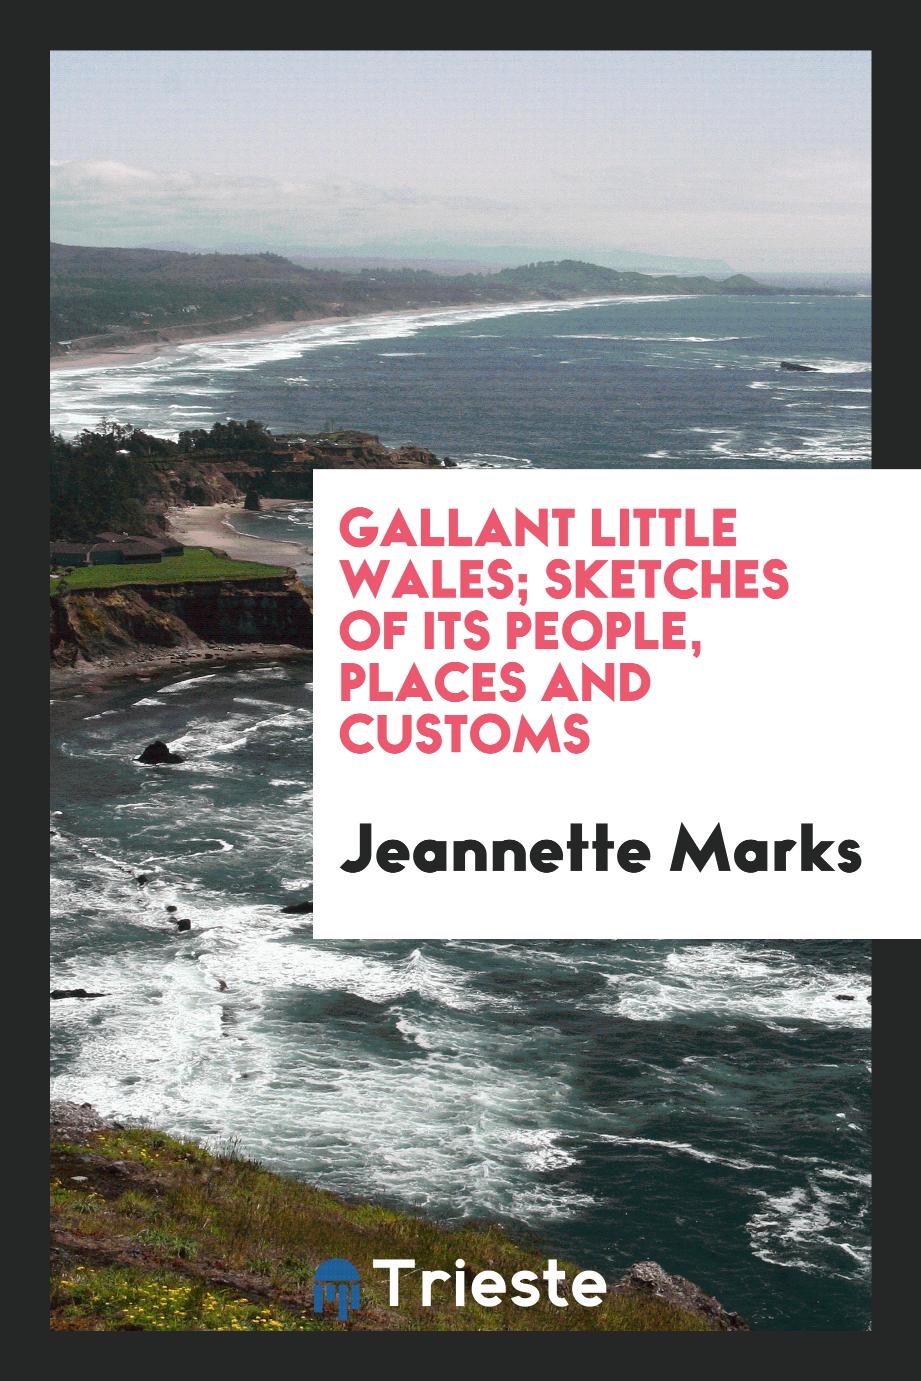 Gallant little Wales; sketches of its people, places and customs